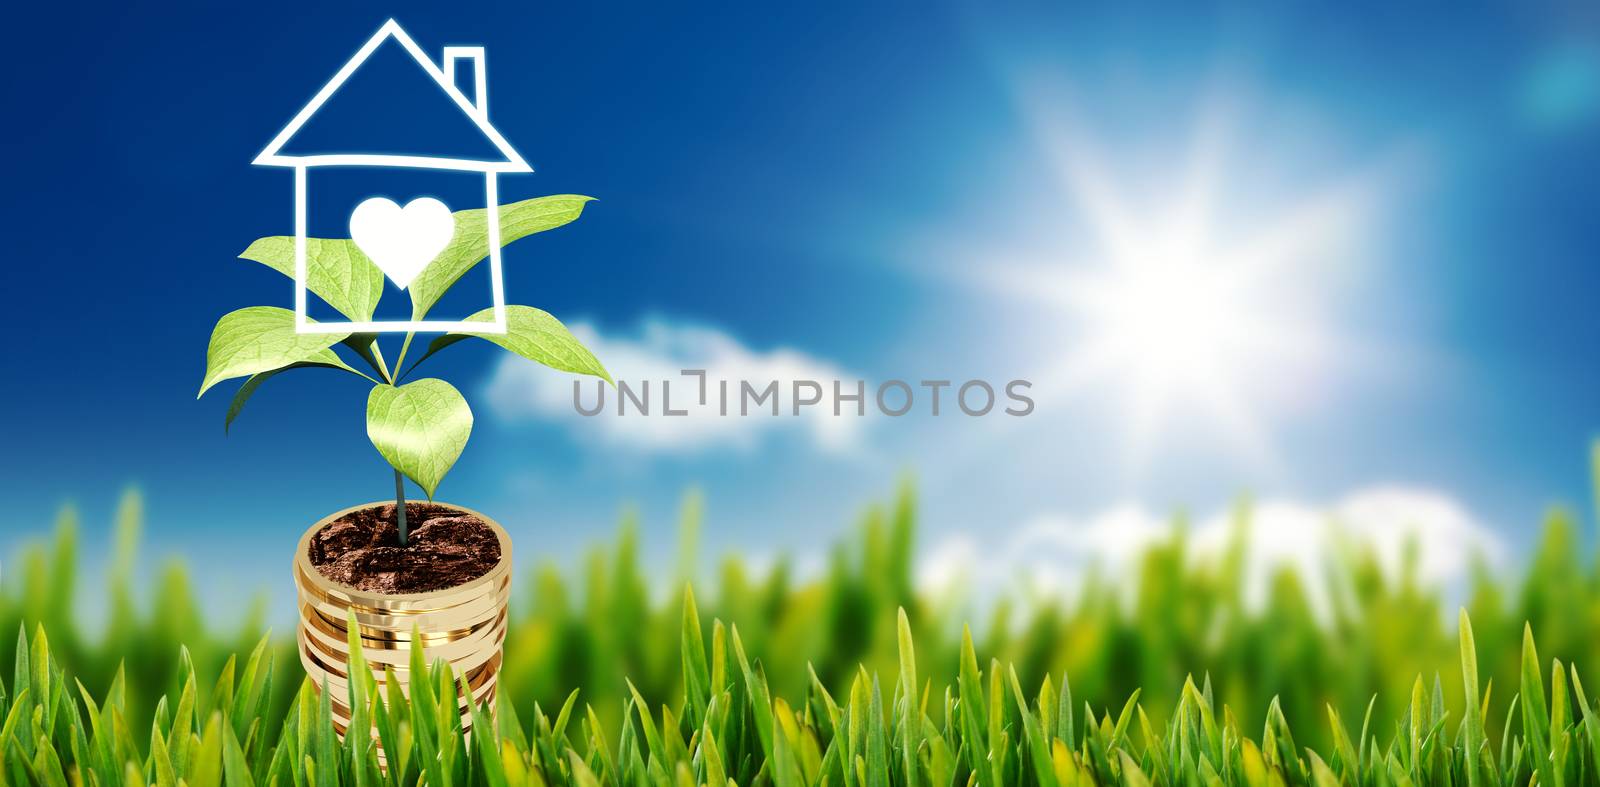 Composite image of grass growing outdoors by Wavebreakmedia